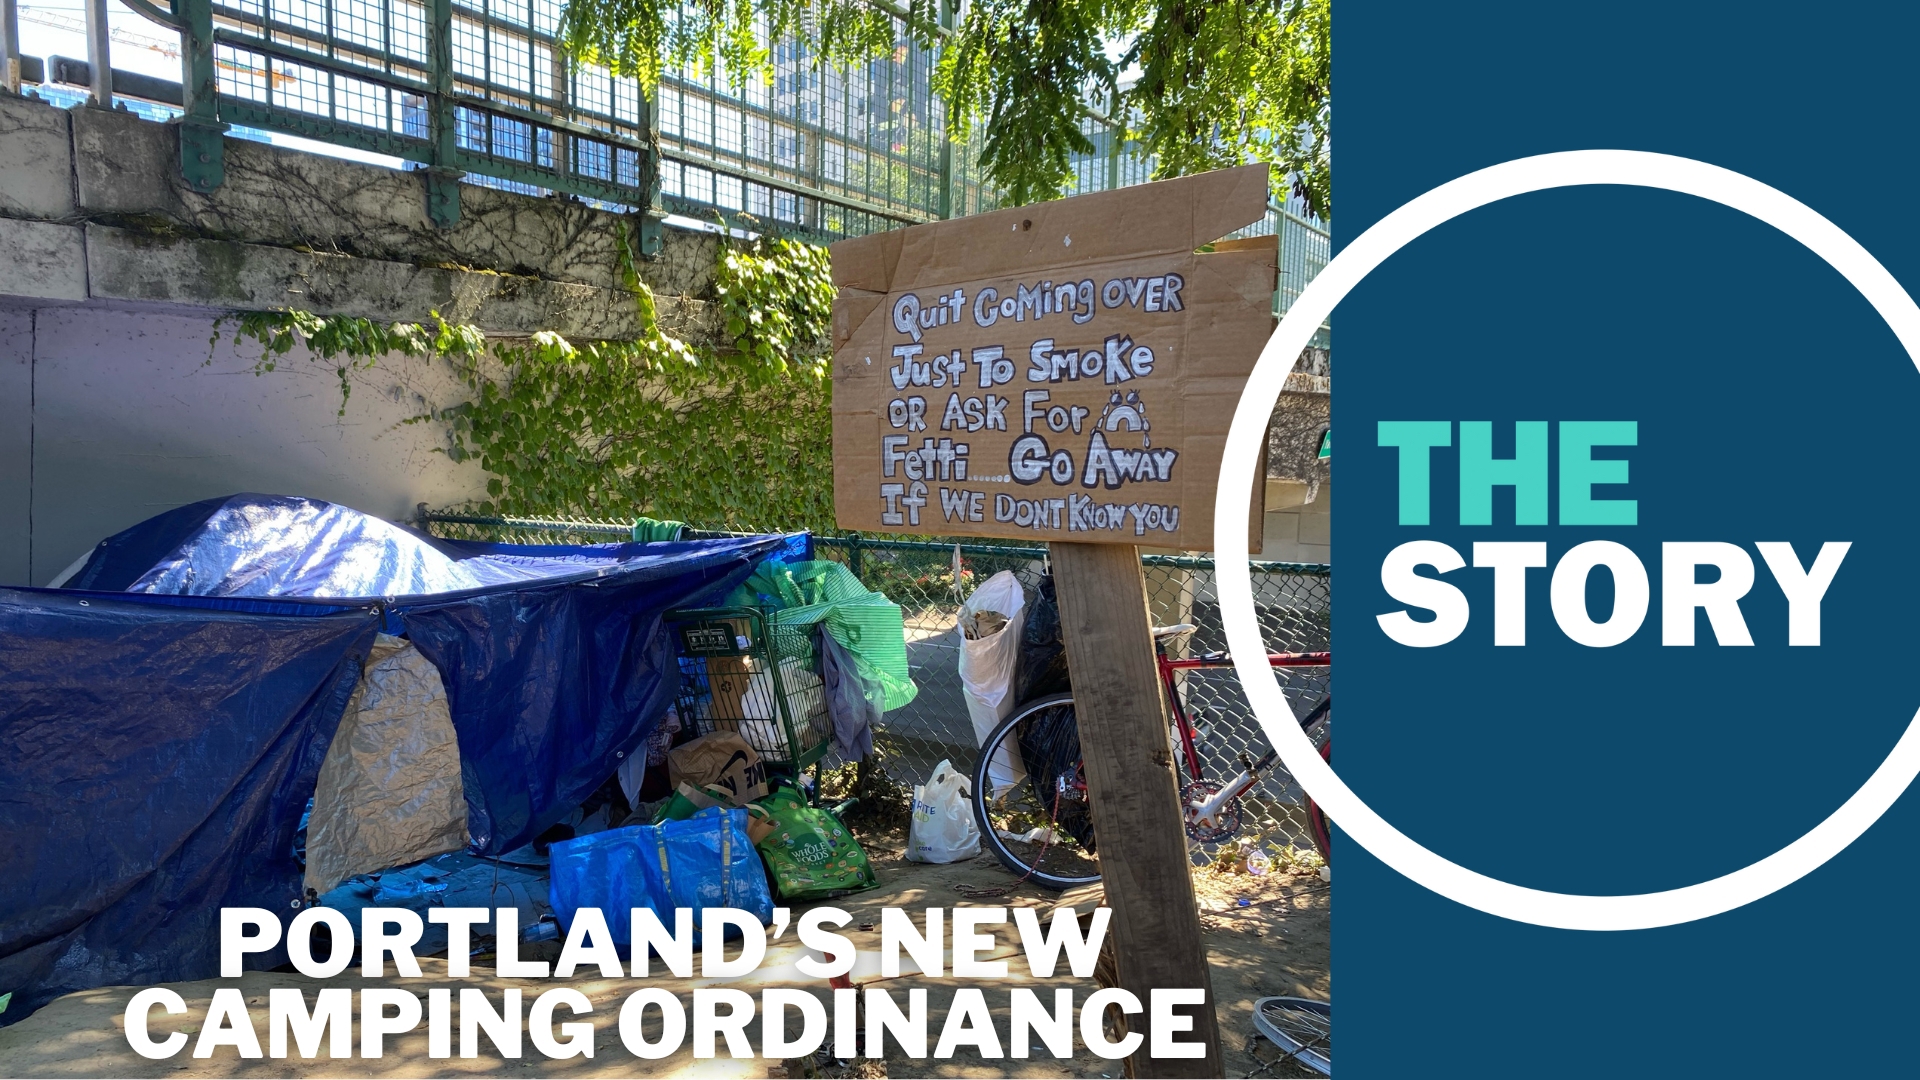 Mayor Ted Wheeler said the city's been getting the word out since May 22, but Blanchet House and homeless people contacted by KGW were unaware of the timeline.